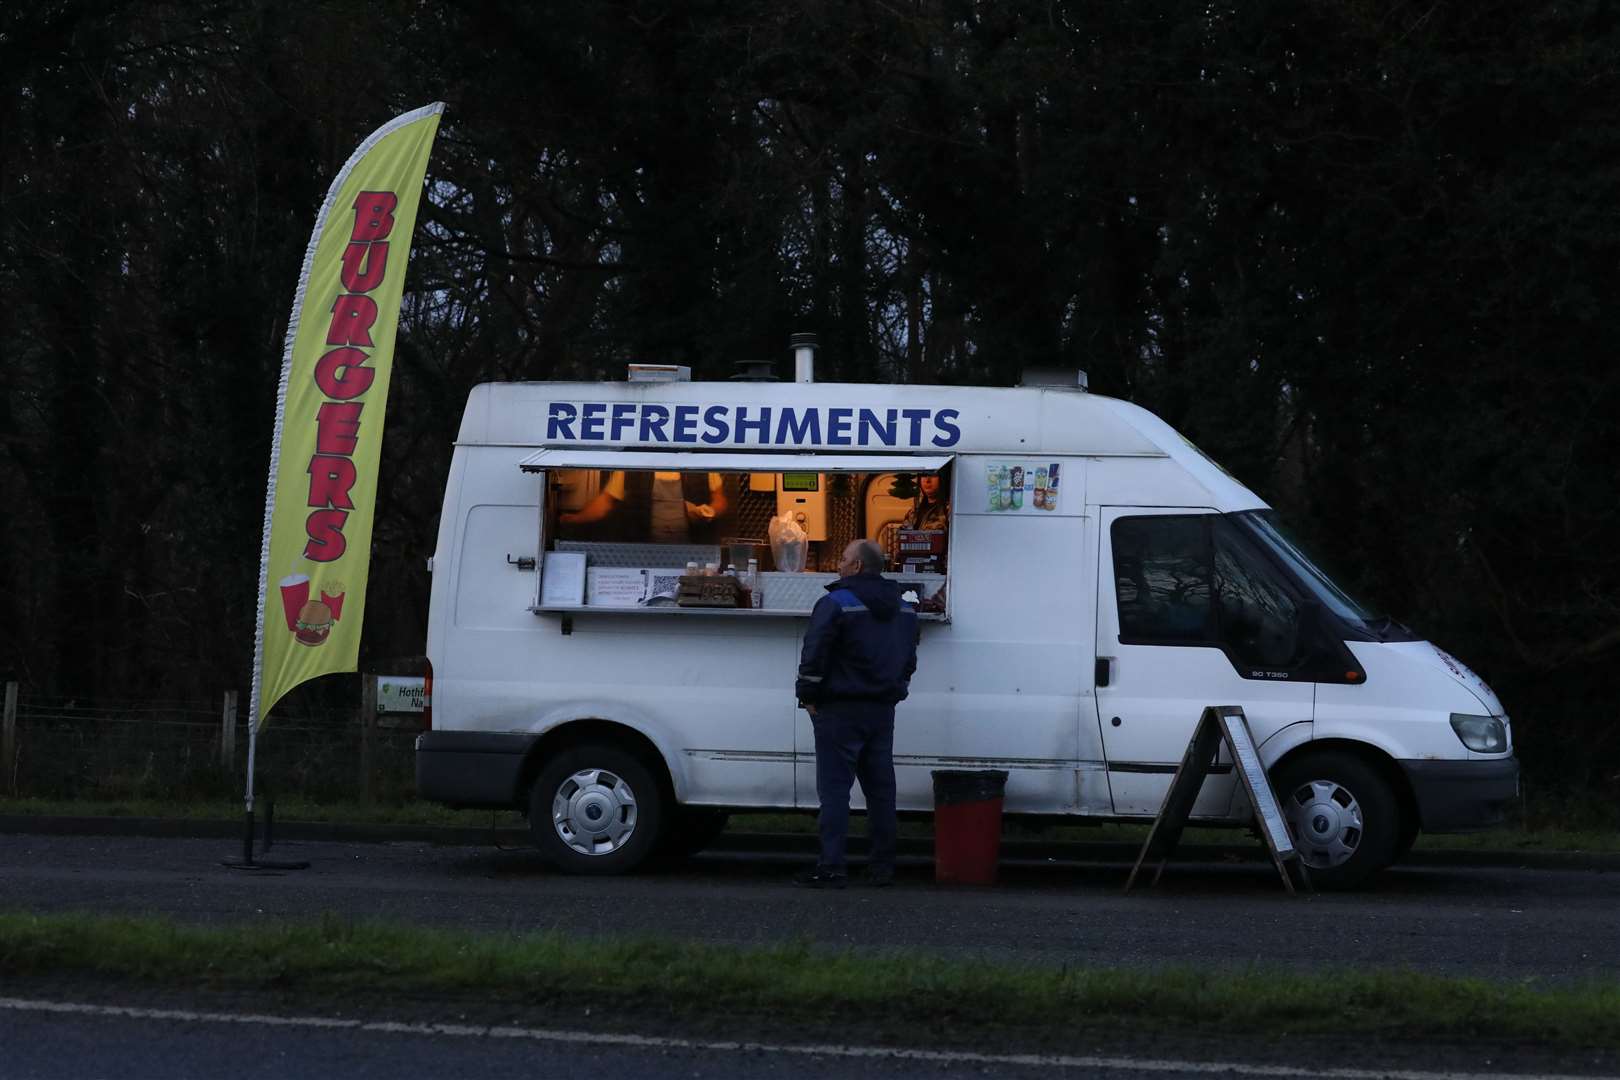 Refreshments for driver at Manston Picture: UKNIP